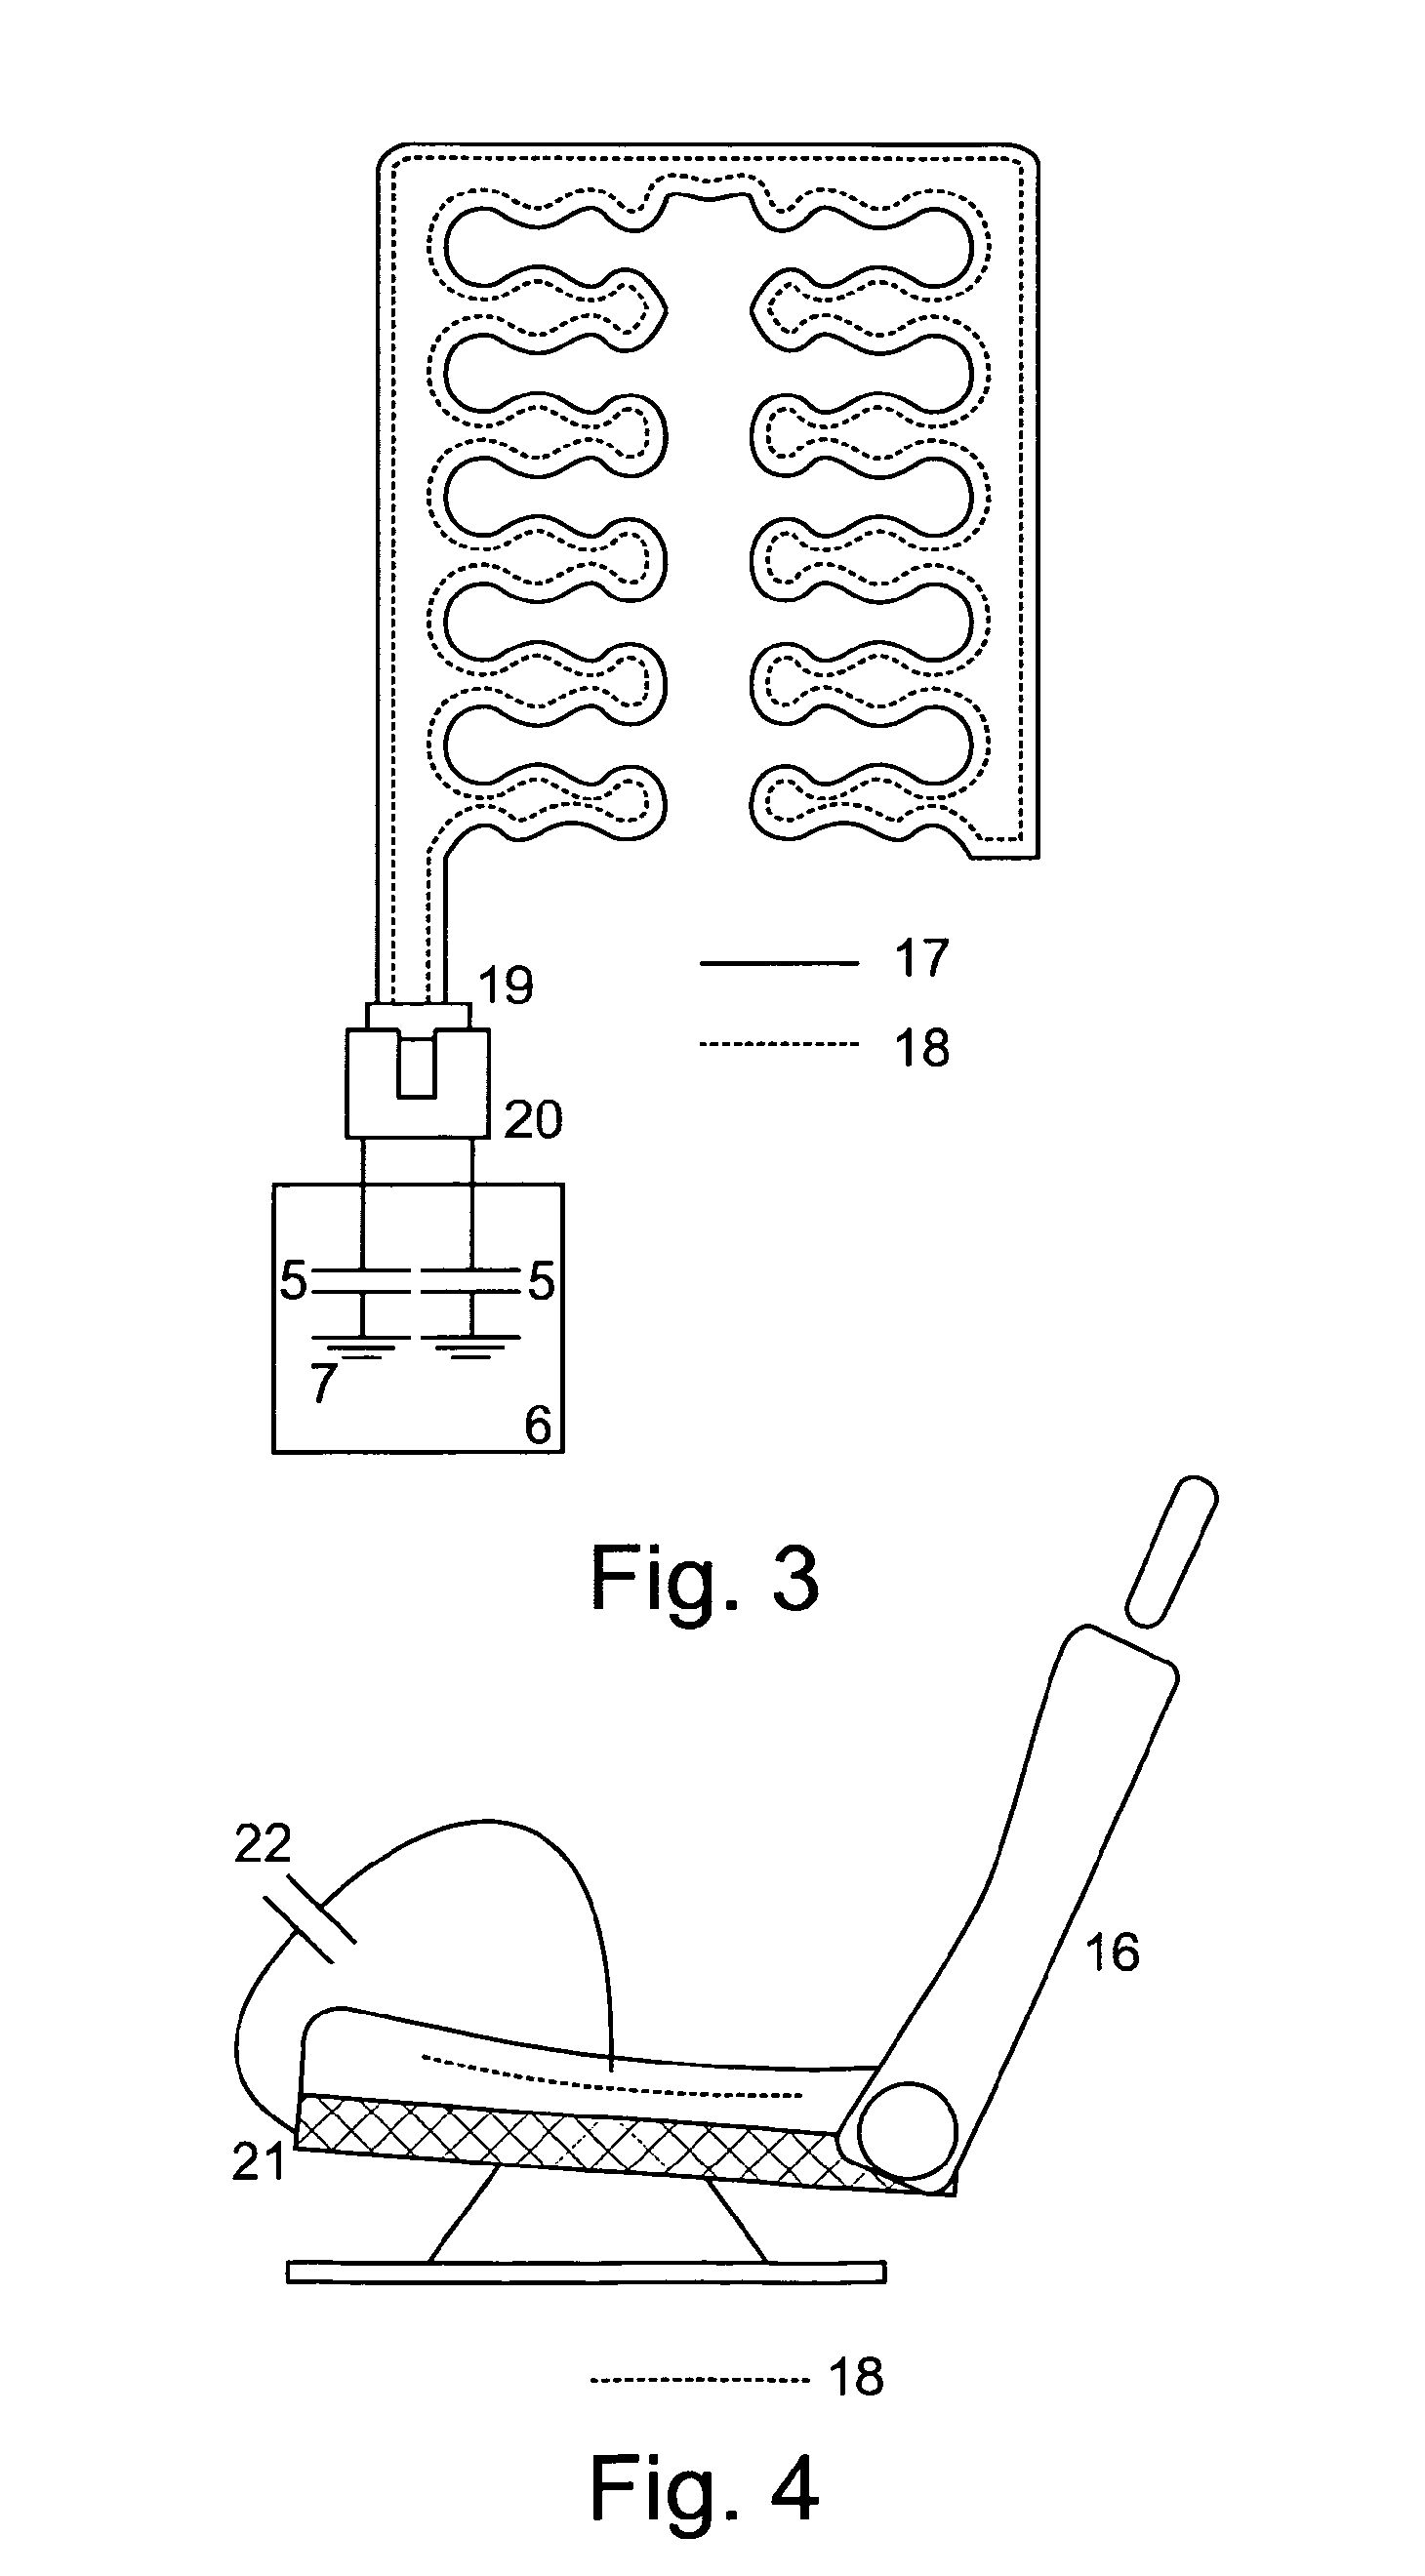 Capacitive occupant detection system